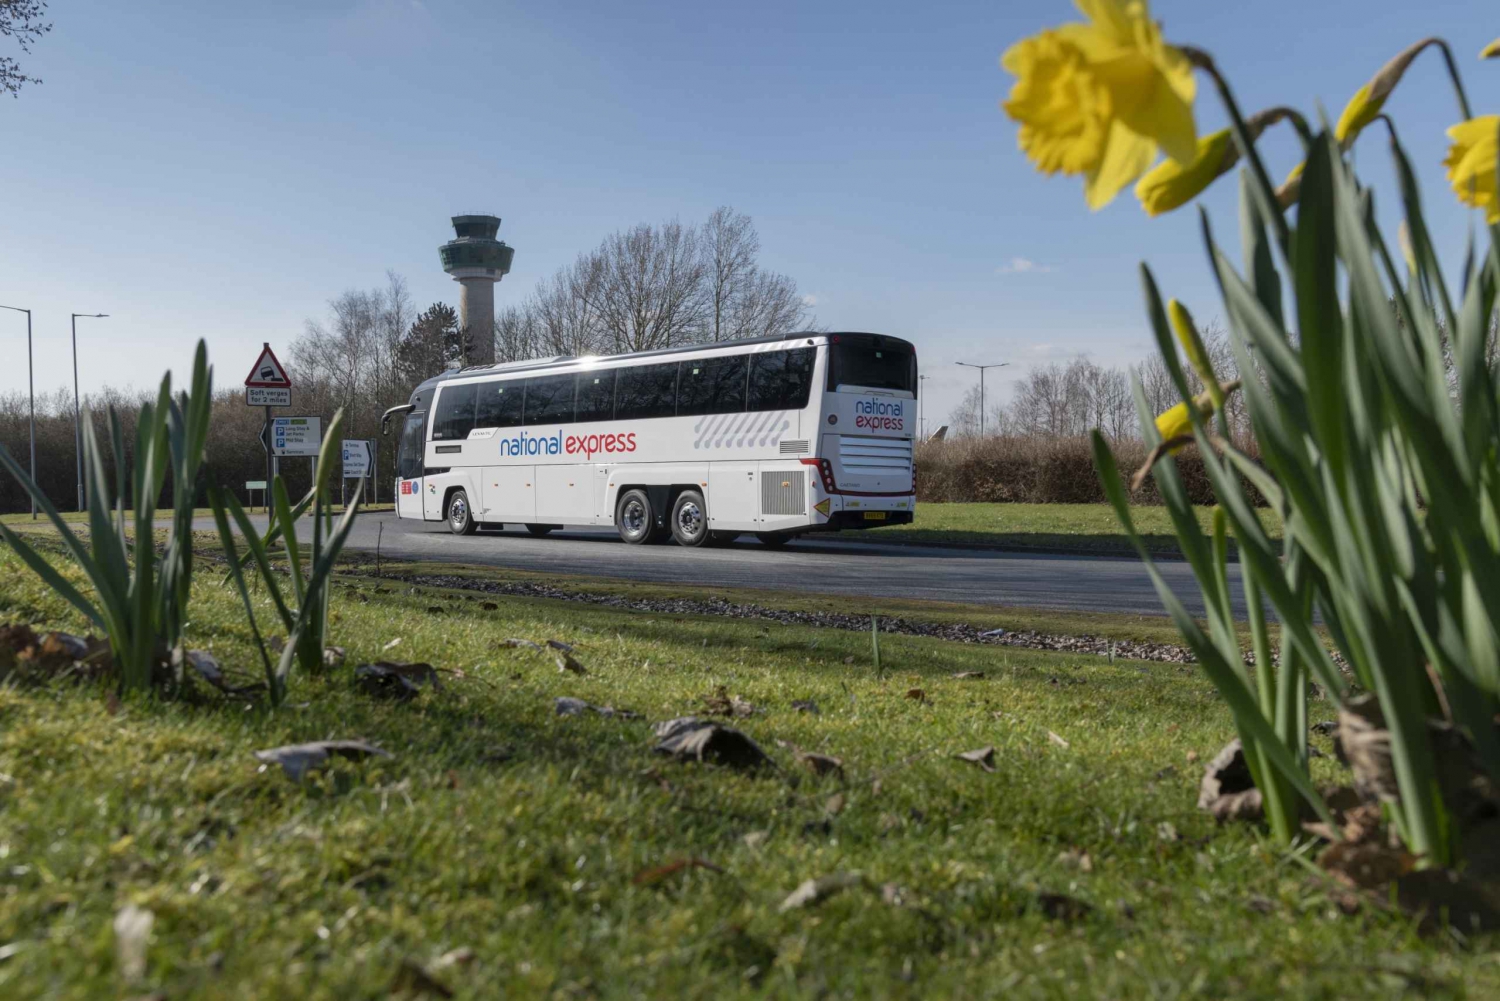 London: Bus Transfer between Stansted & Luton Airports